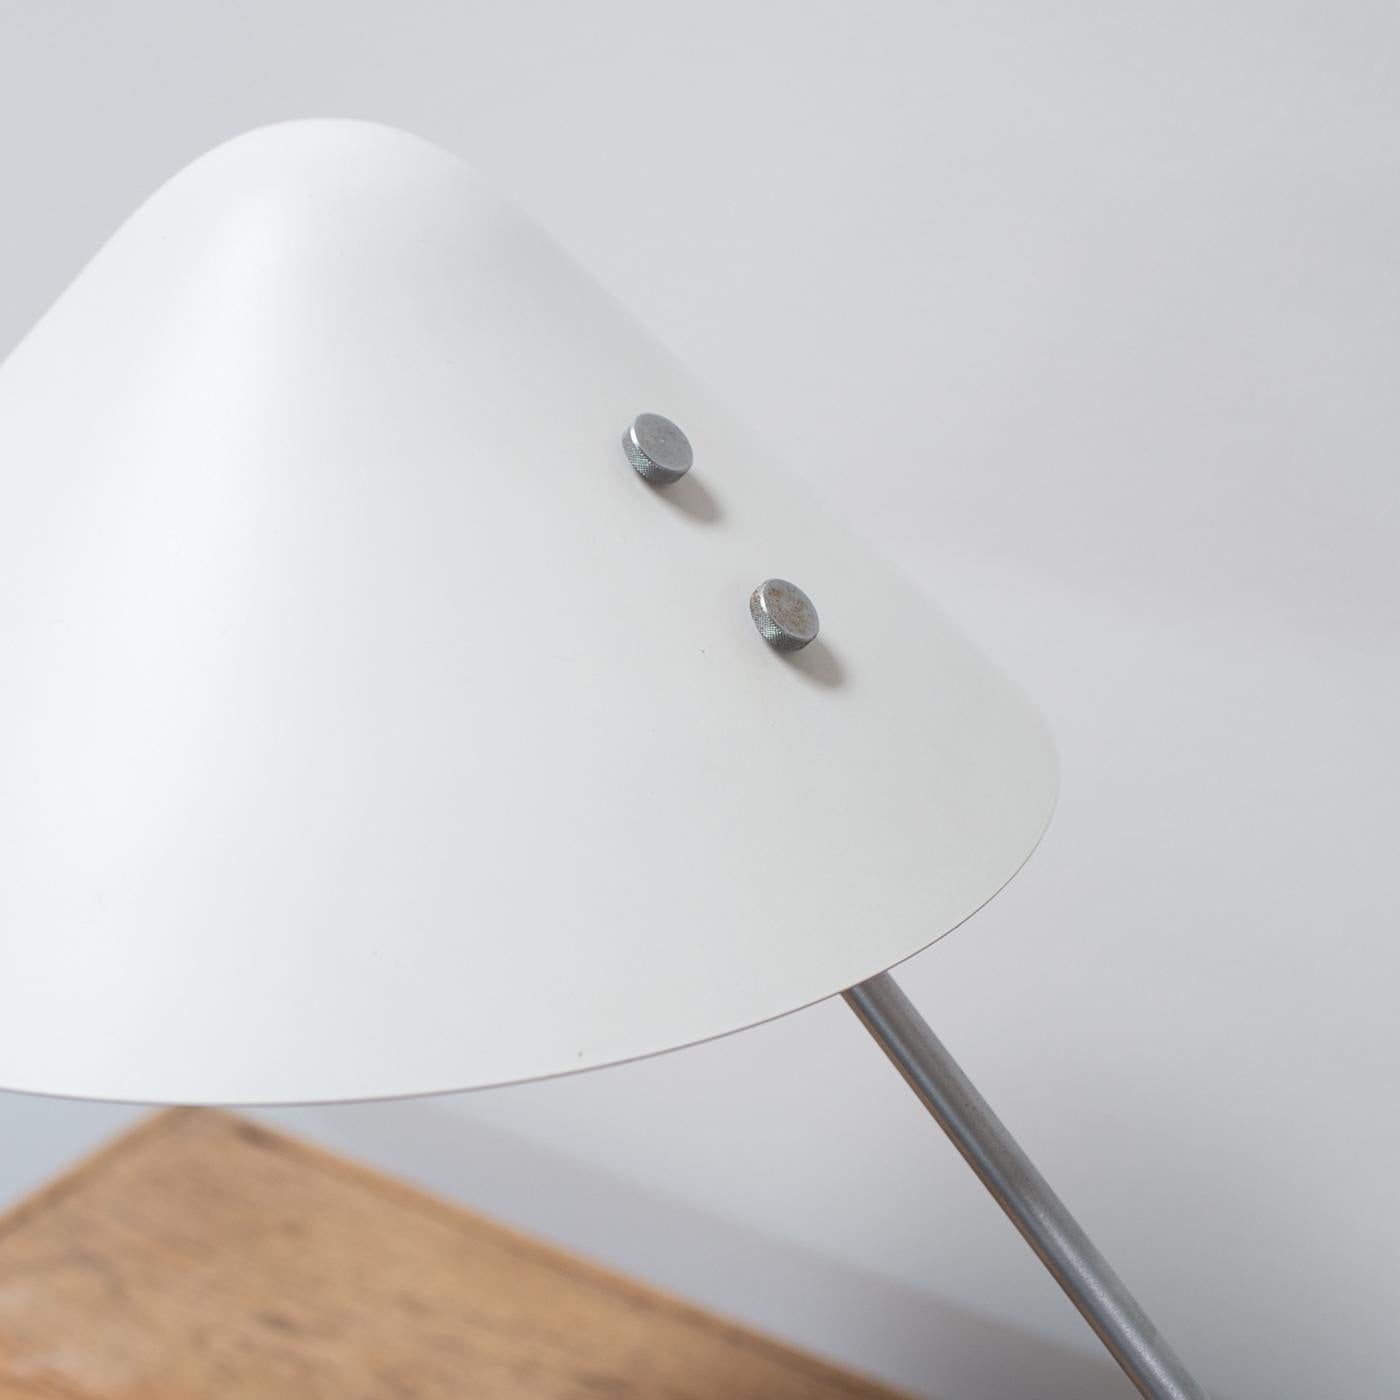 This Danish Modern cantilevered desk lamp by Jørgen Gammelgaard rotates 360 degrees. The light weight white enameled shade and brushed steel arm juxtaposed nicely with the heavy stone base.